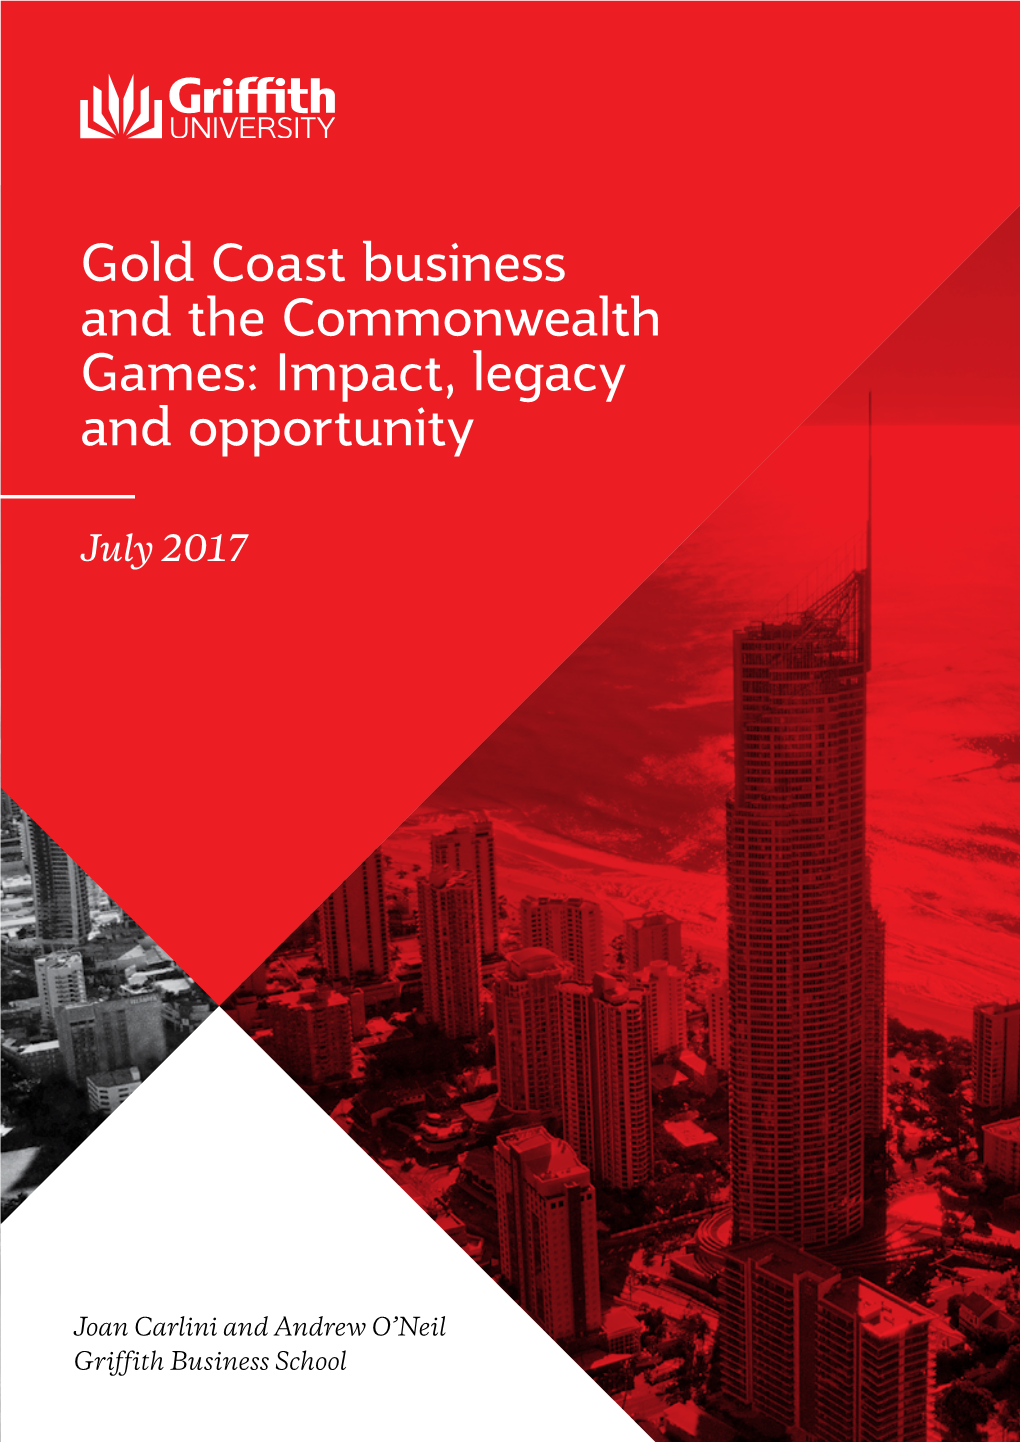 Gold Coast Business and the Commonwealth Games: Impact, Legacy and Opportunity